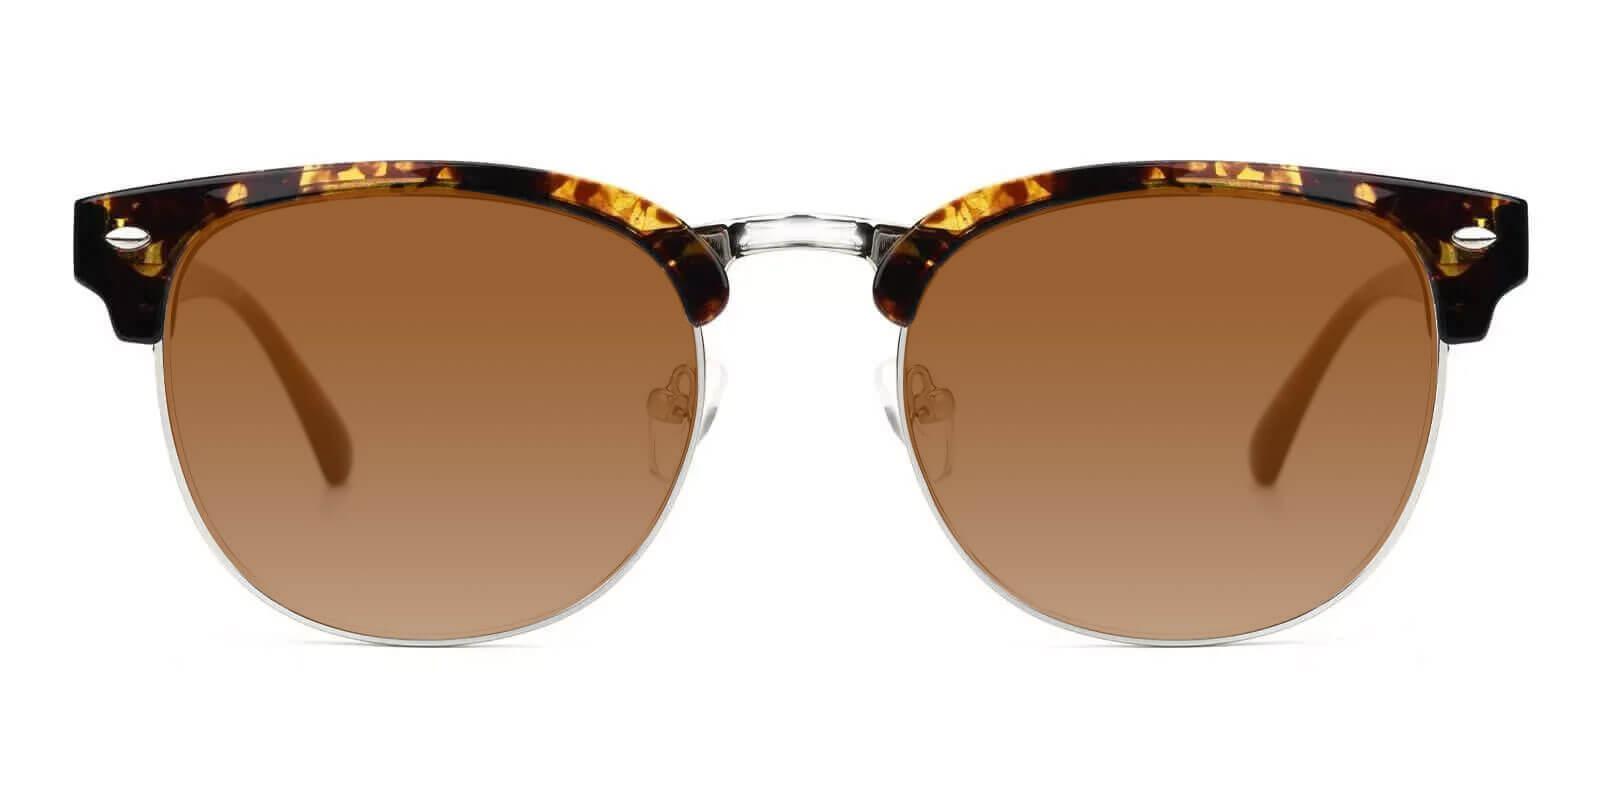 Giveny Pattern TR NosePads , Sunglasses Frames from ABBE Glasses